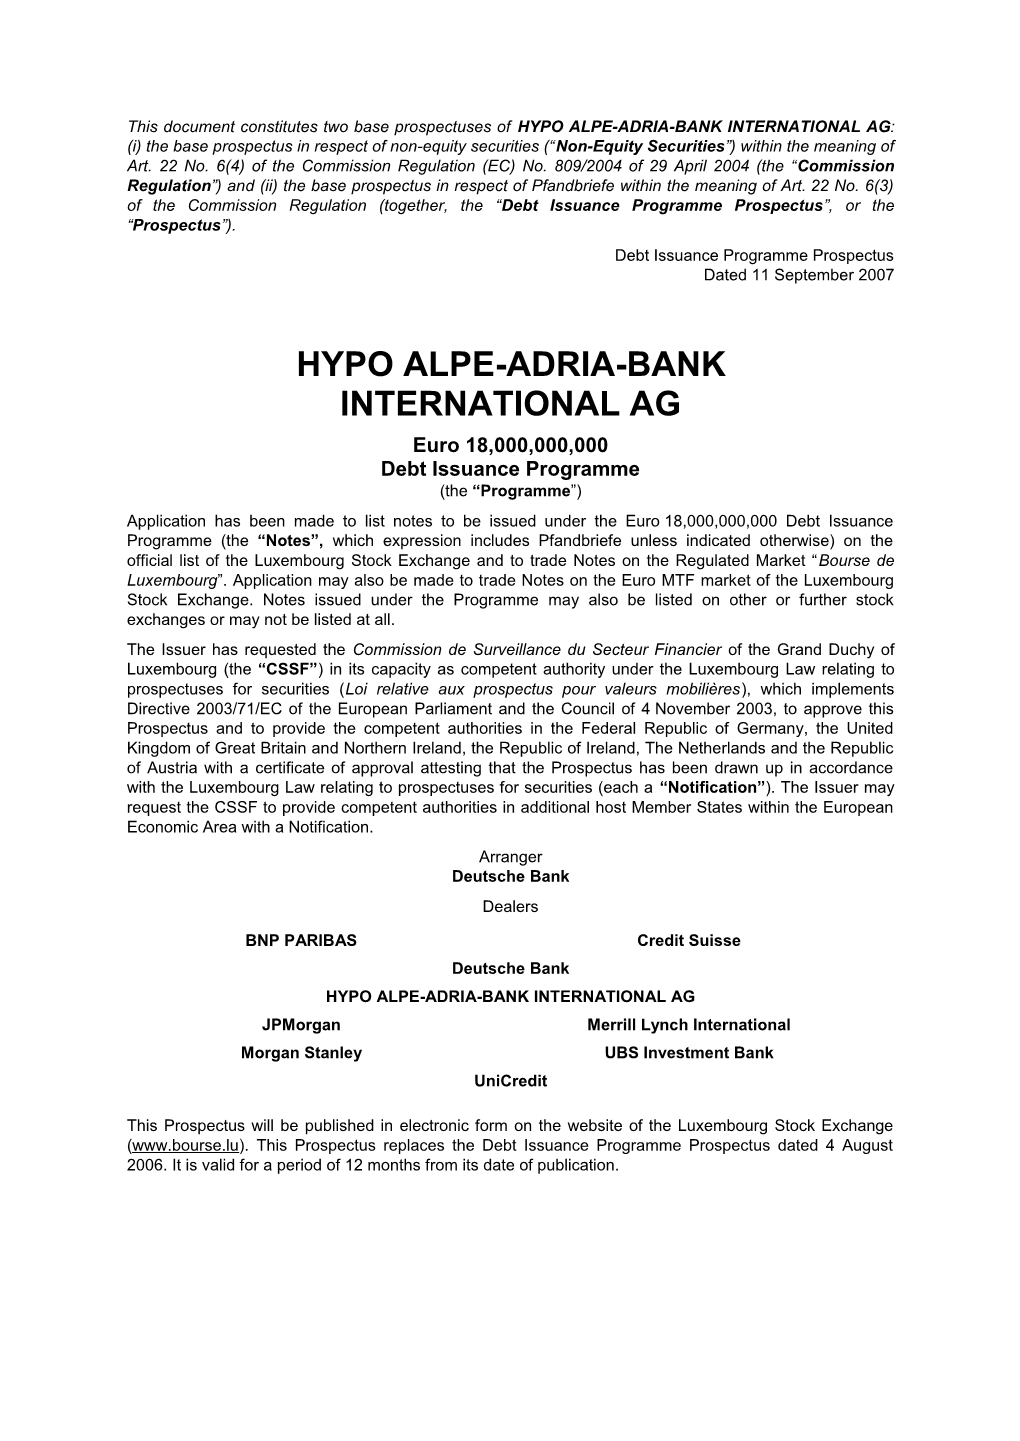 HYPO ALPE-ADRIA-BANK INTERNATIONAL AG: (I) the Base Prospectus in Respect of Non-Equity Securities (“Non-Equity Securities”) Within the Meaning of Art